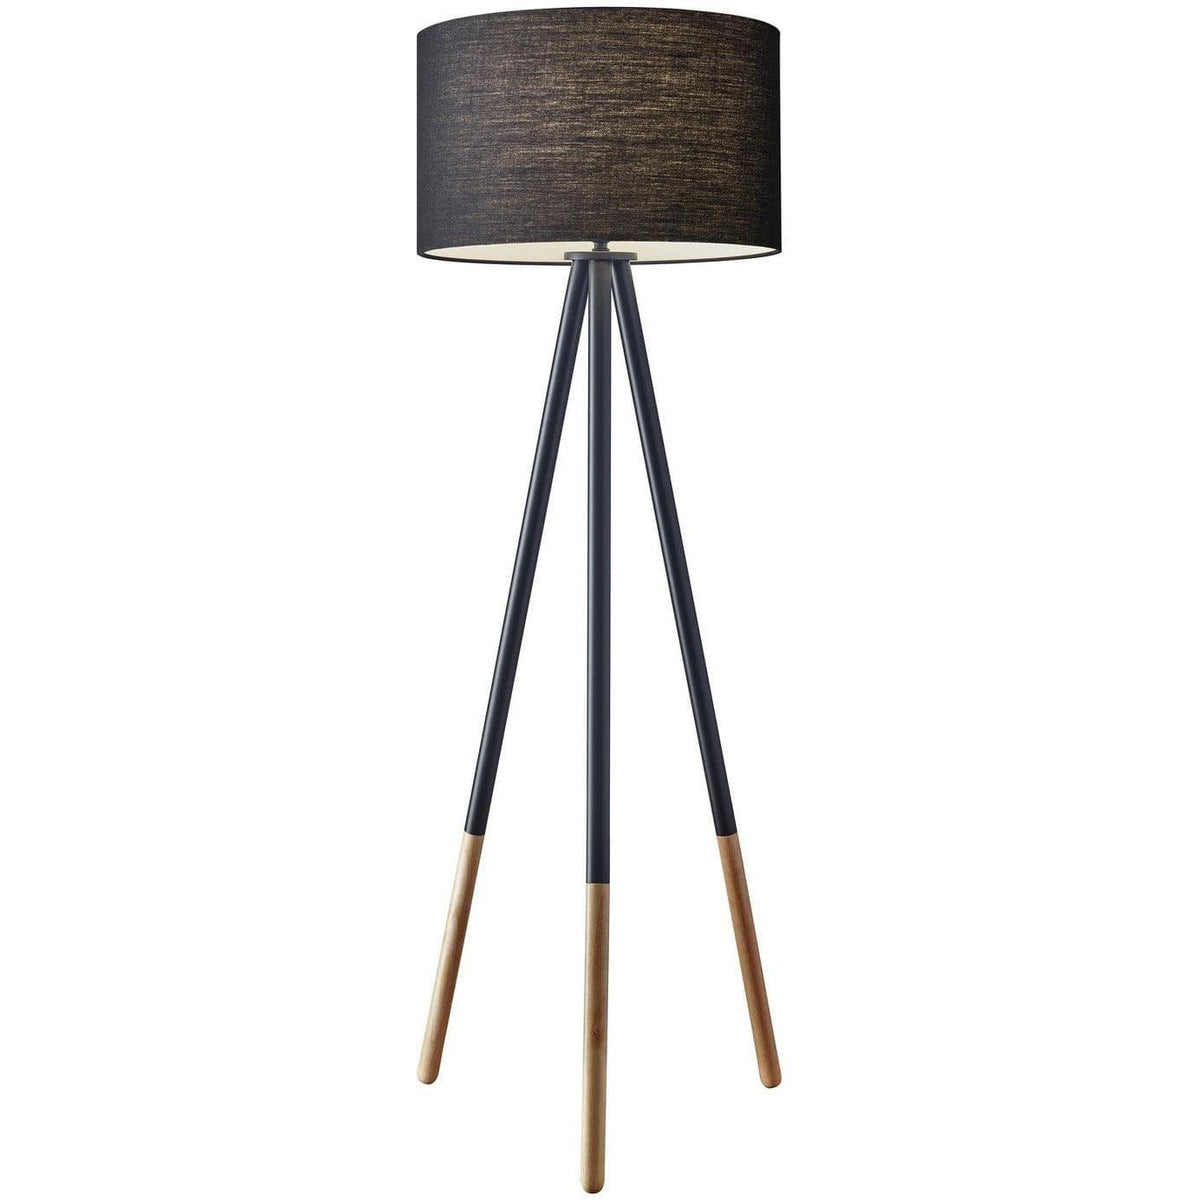 Adesso Home - Louise Floor Lamp - 6285-01 | Montreal Lighting & Hardware